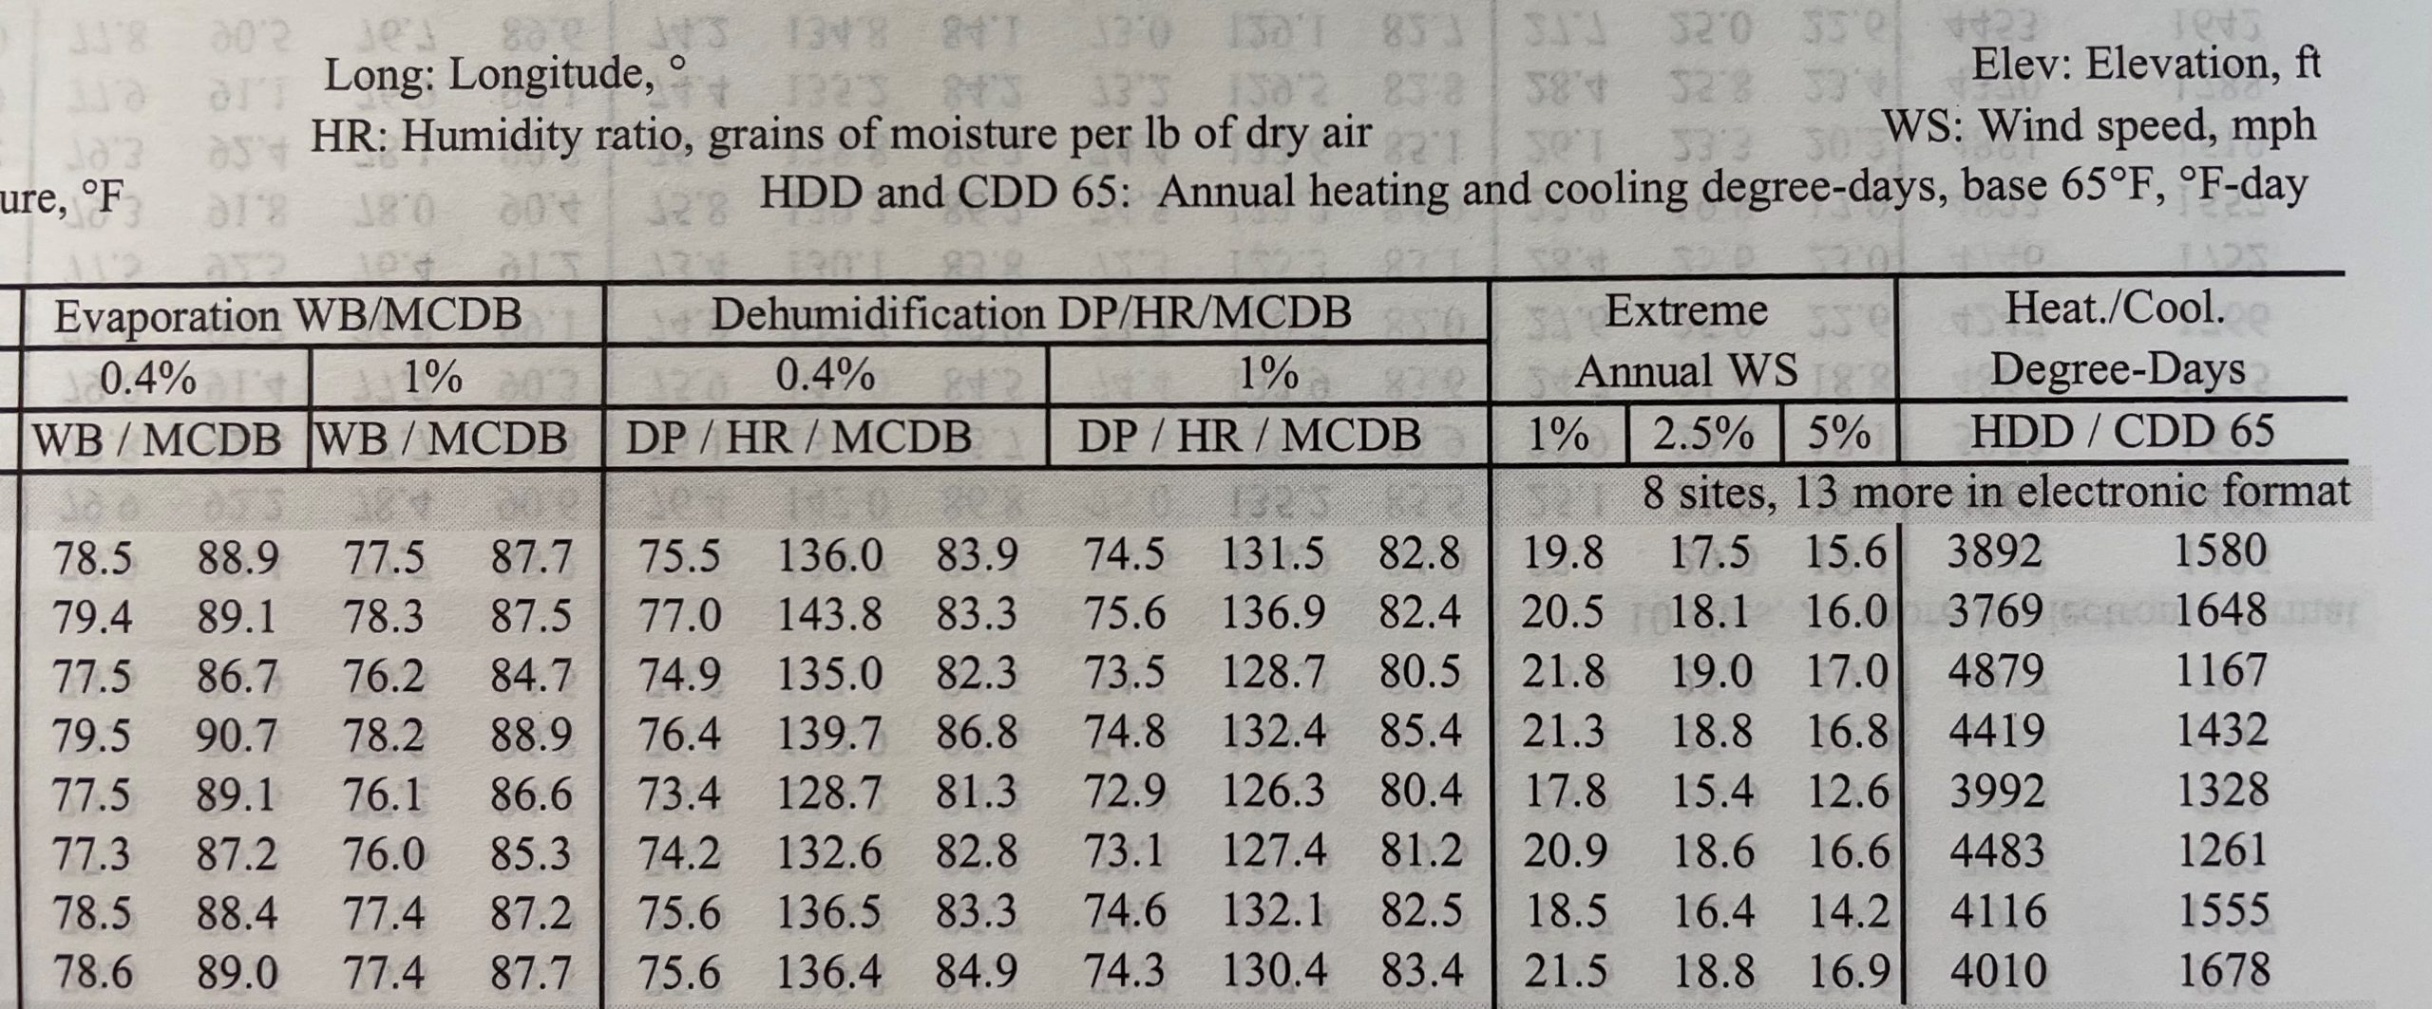 ashrae design temperatures by city Bulan 2 What Does “Design Day” Really Mean? - Air Equipment Company - Homepage